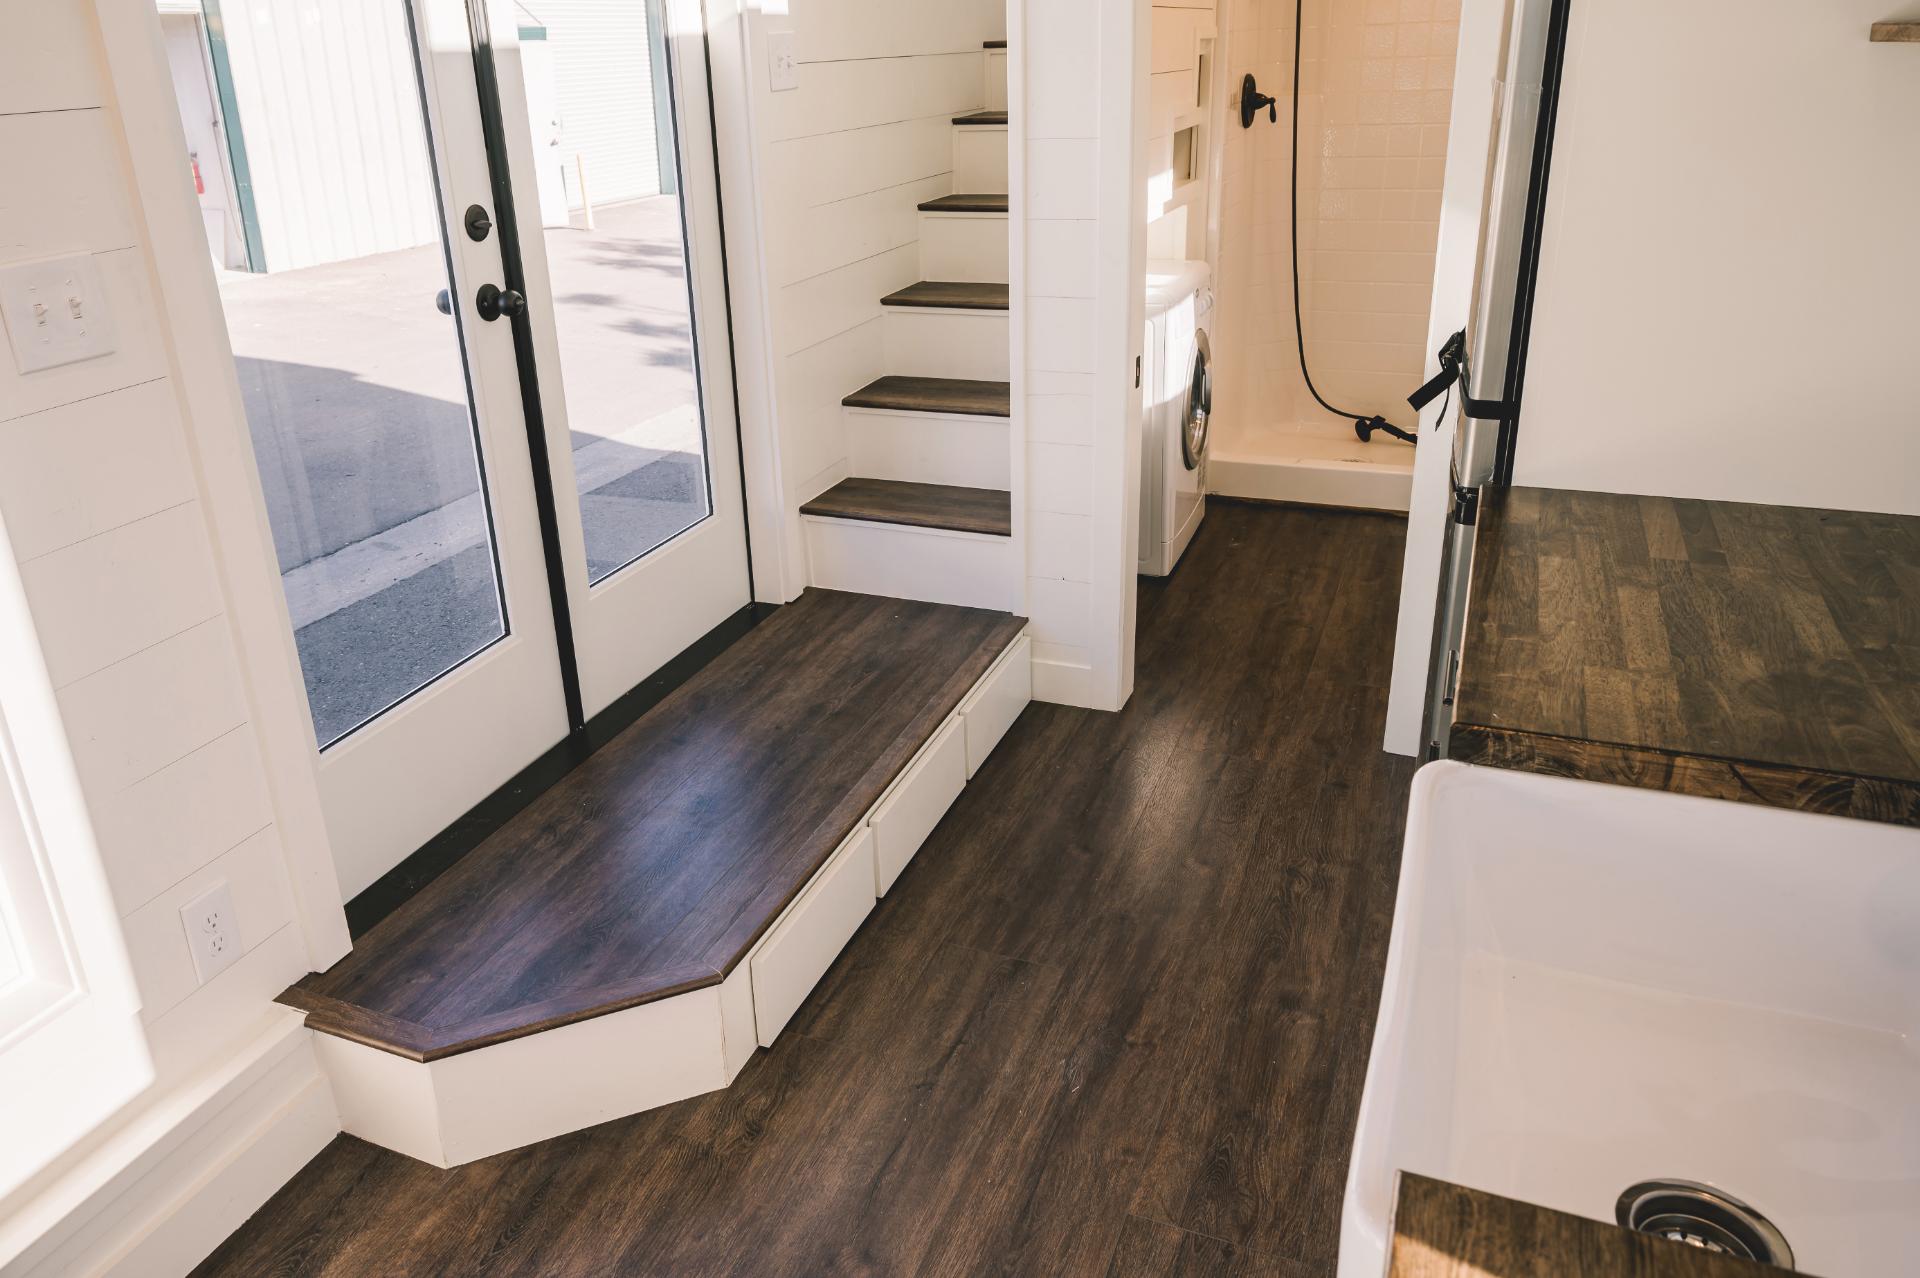 Large Landing Step with Storage in Front of Door - Gallery 30 by California Tiny House